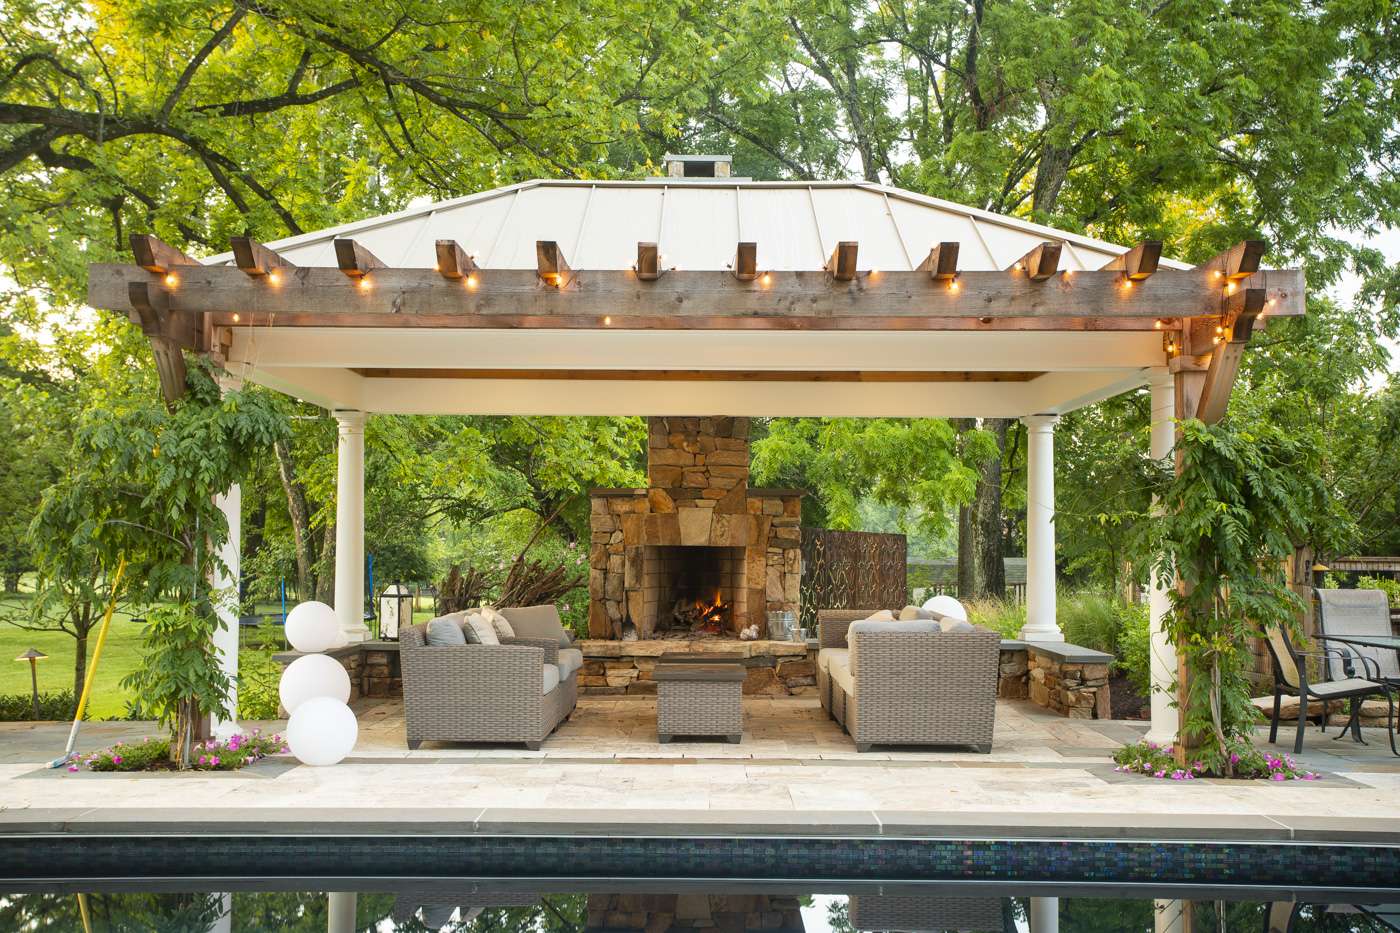 Pavilion with outdoor fireplace